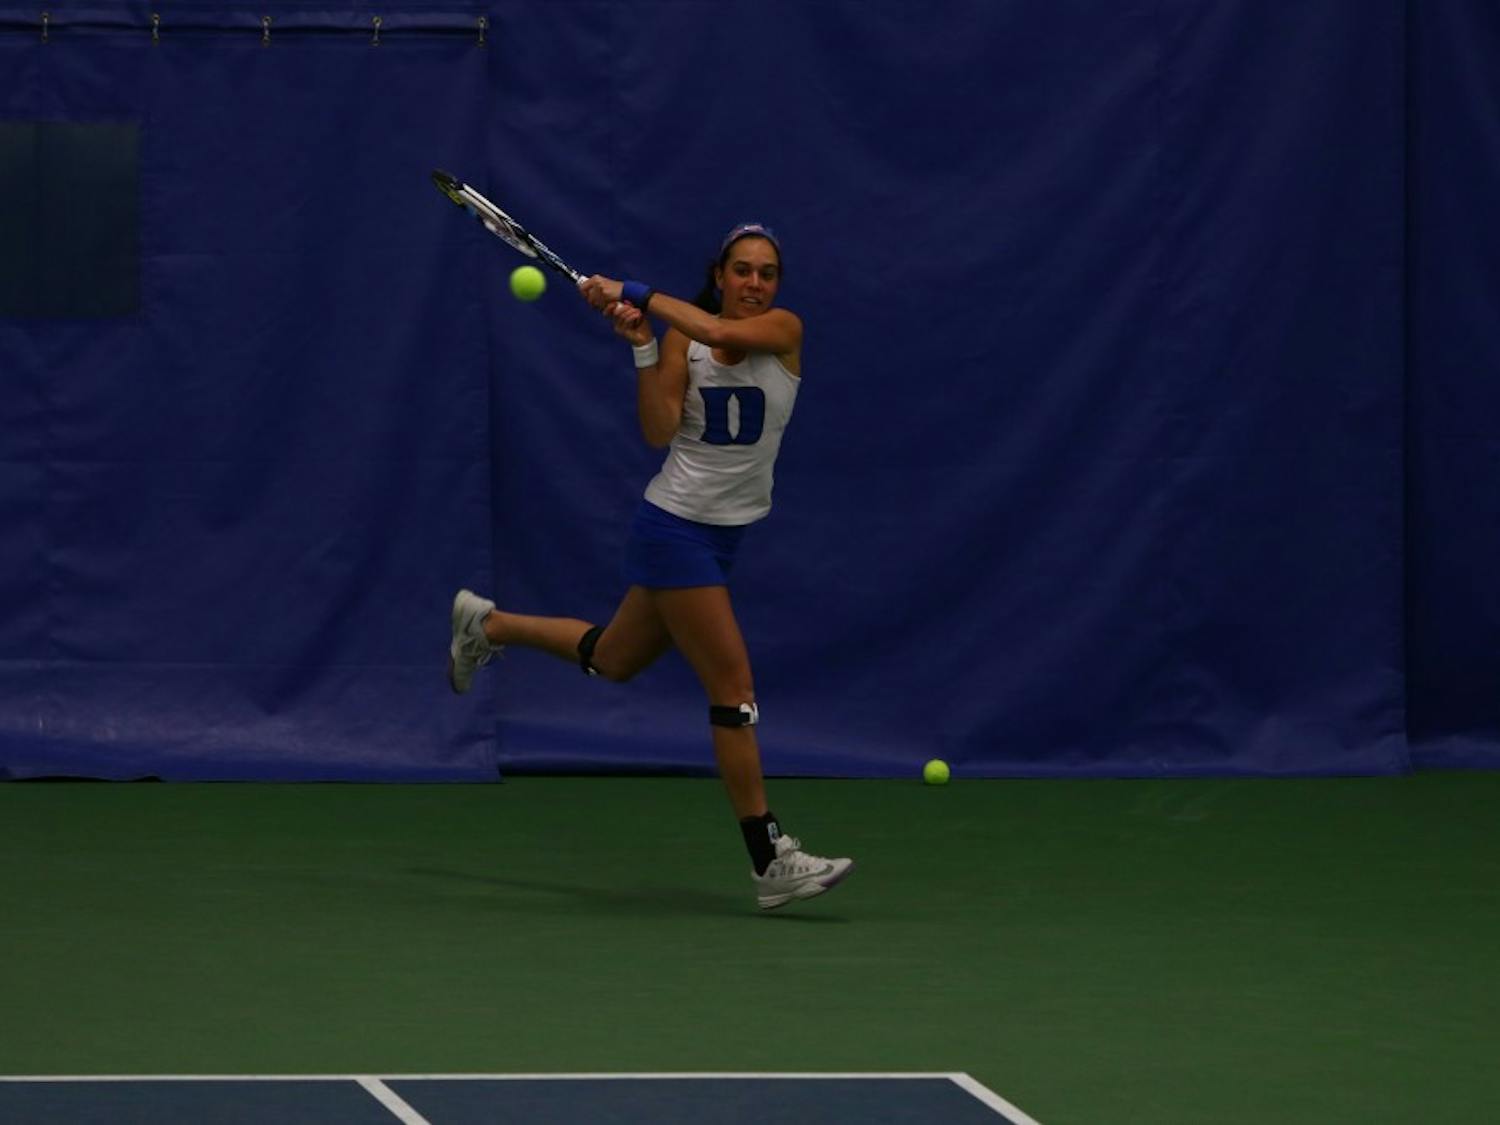 Beatrice Capra and No. 10 Duke kicked off a grueling stretch with a 6-1 win at No. 14 Wake Forest Saturday afternoon.